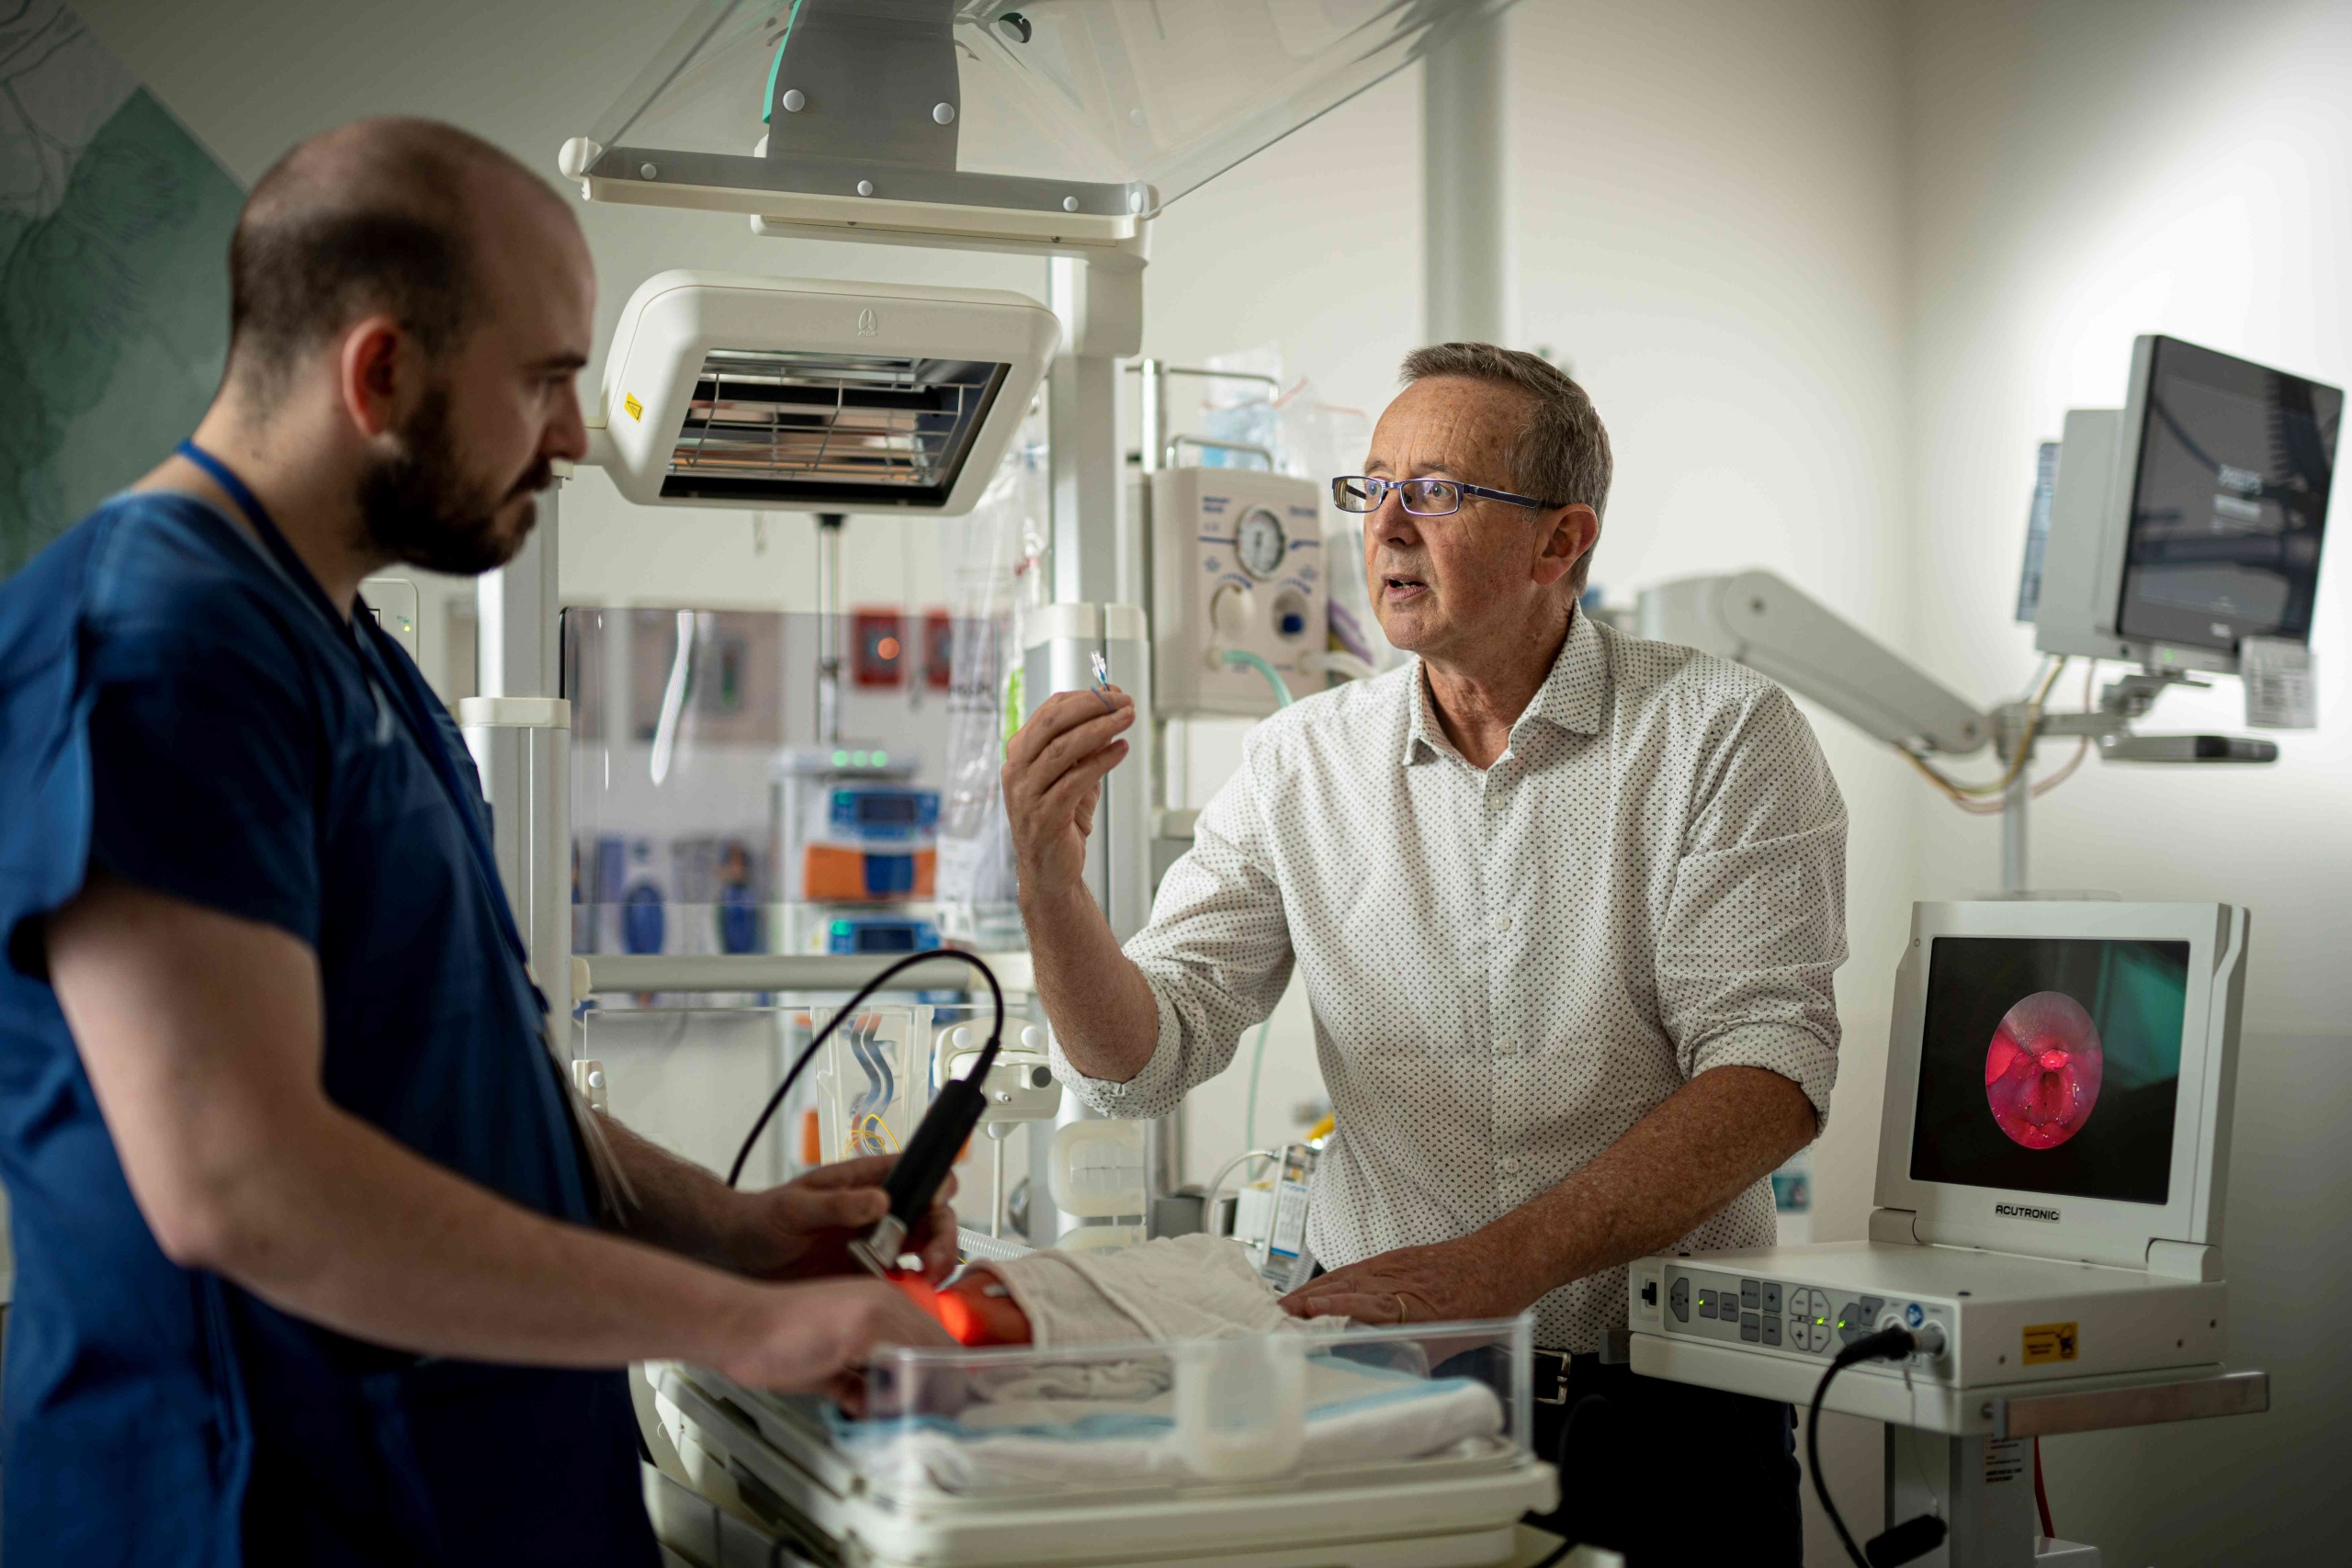 Professor Peter Dargaville trains Lewis Johnson in the Neonatal Intensive Care Unit at the RHH